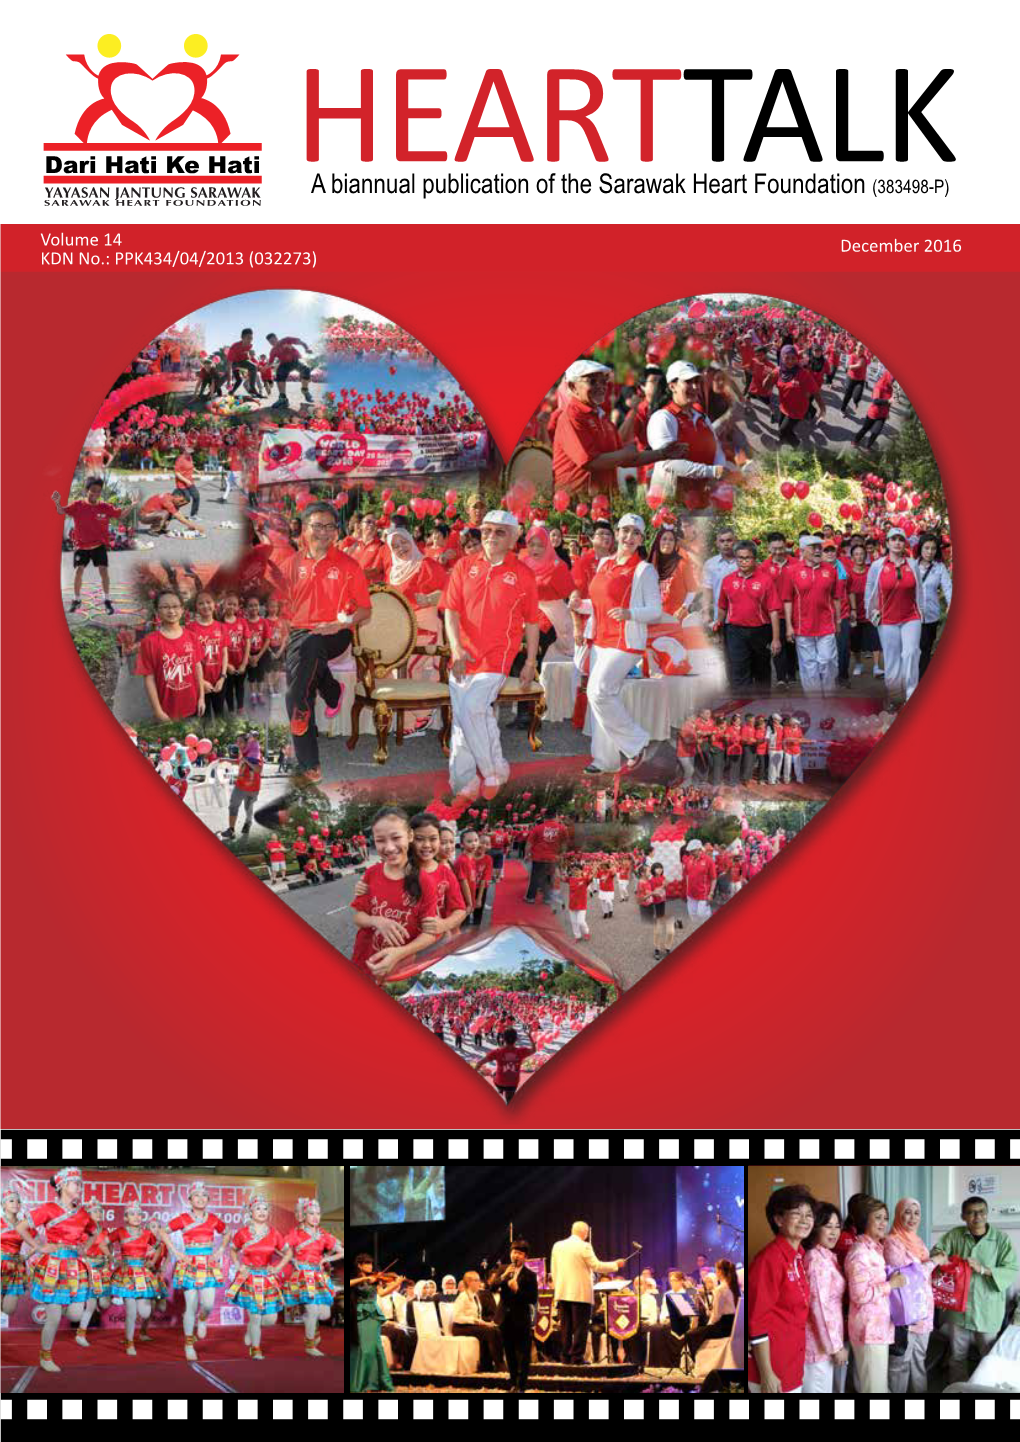 A Biannual Publication of the Sarawak Heart Foundation (383498-P)